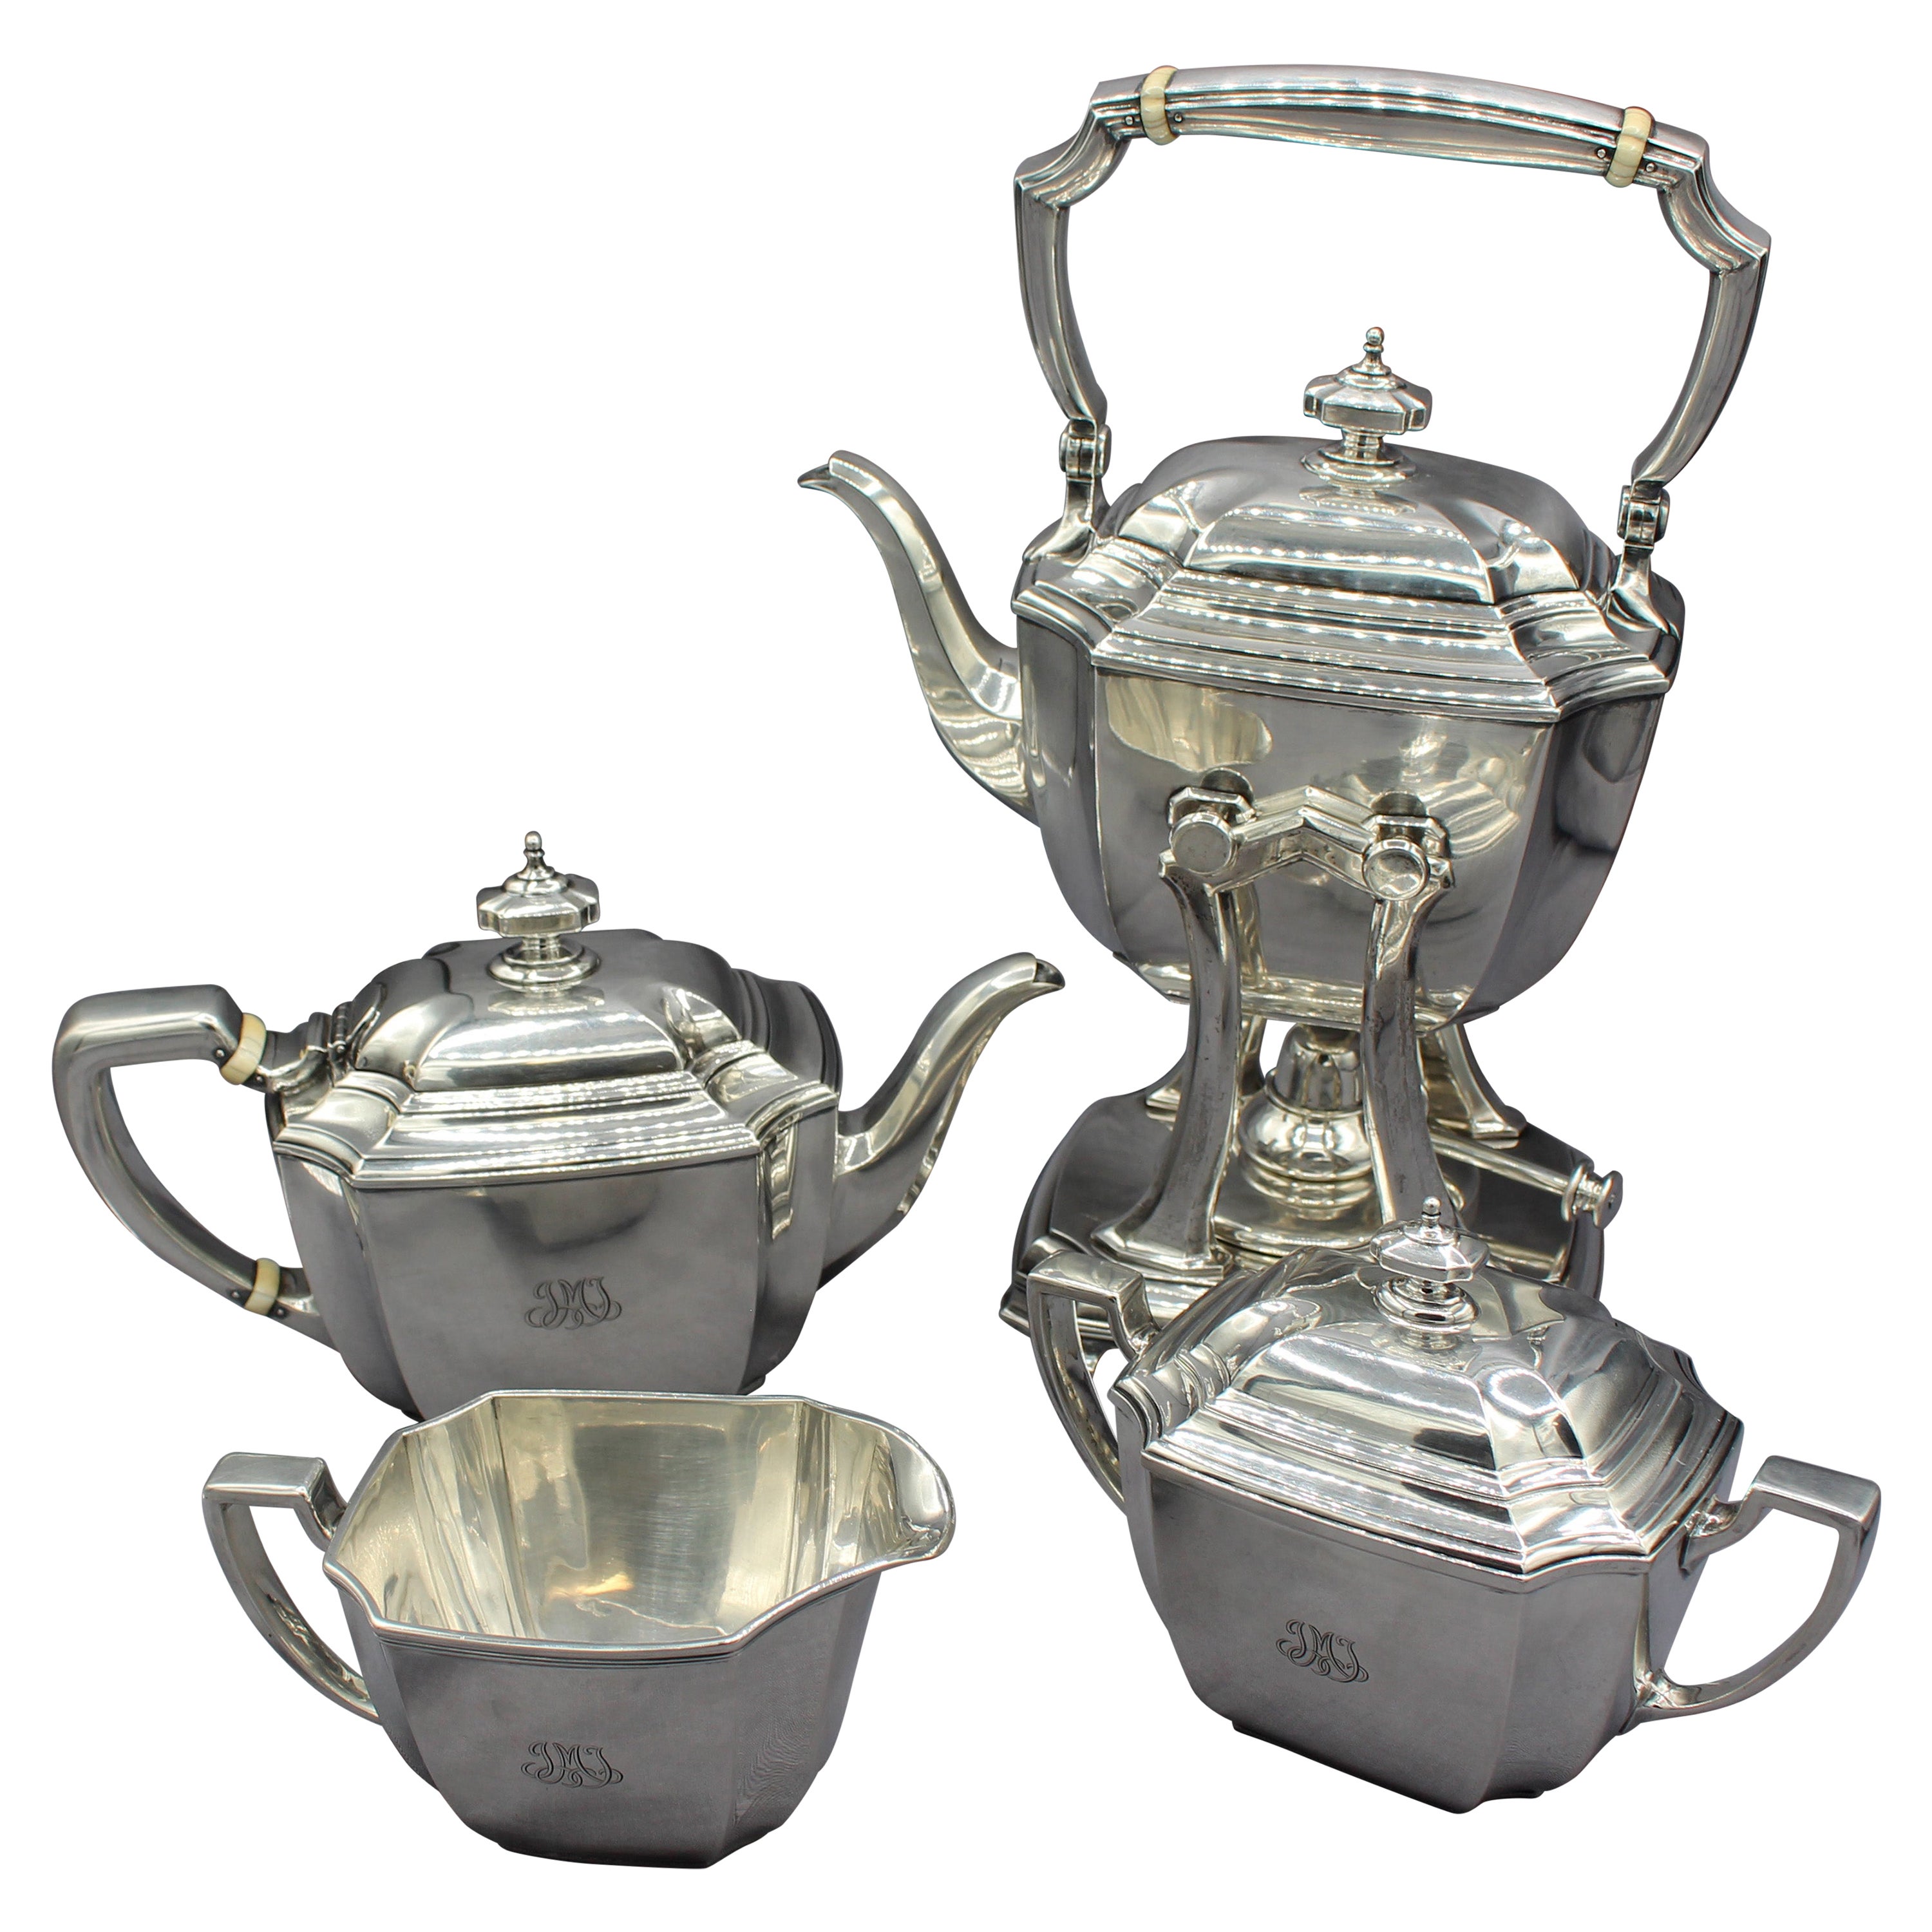 c. 1920s-30s 4-Piece Sterling Silver Tea Service by Tiffany